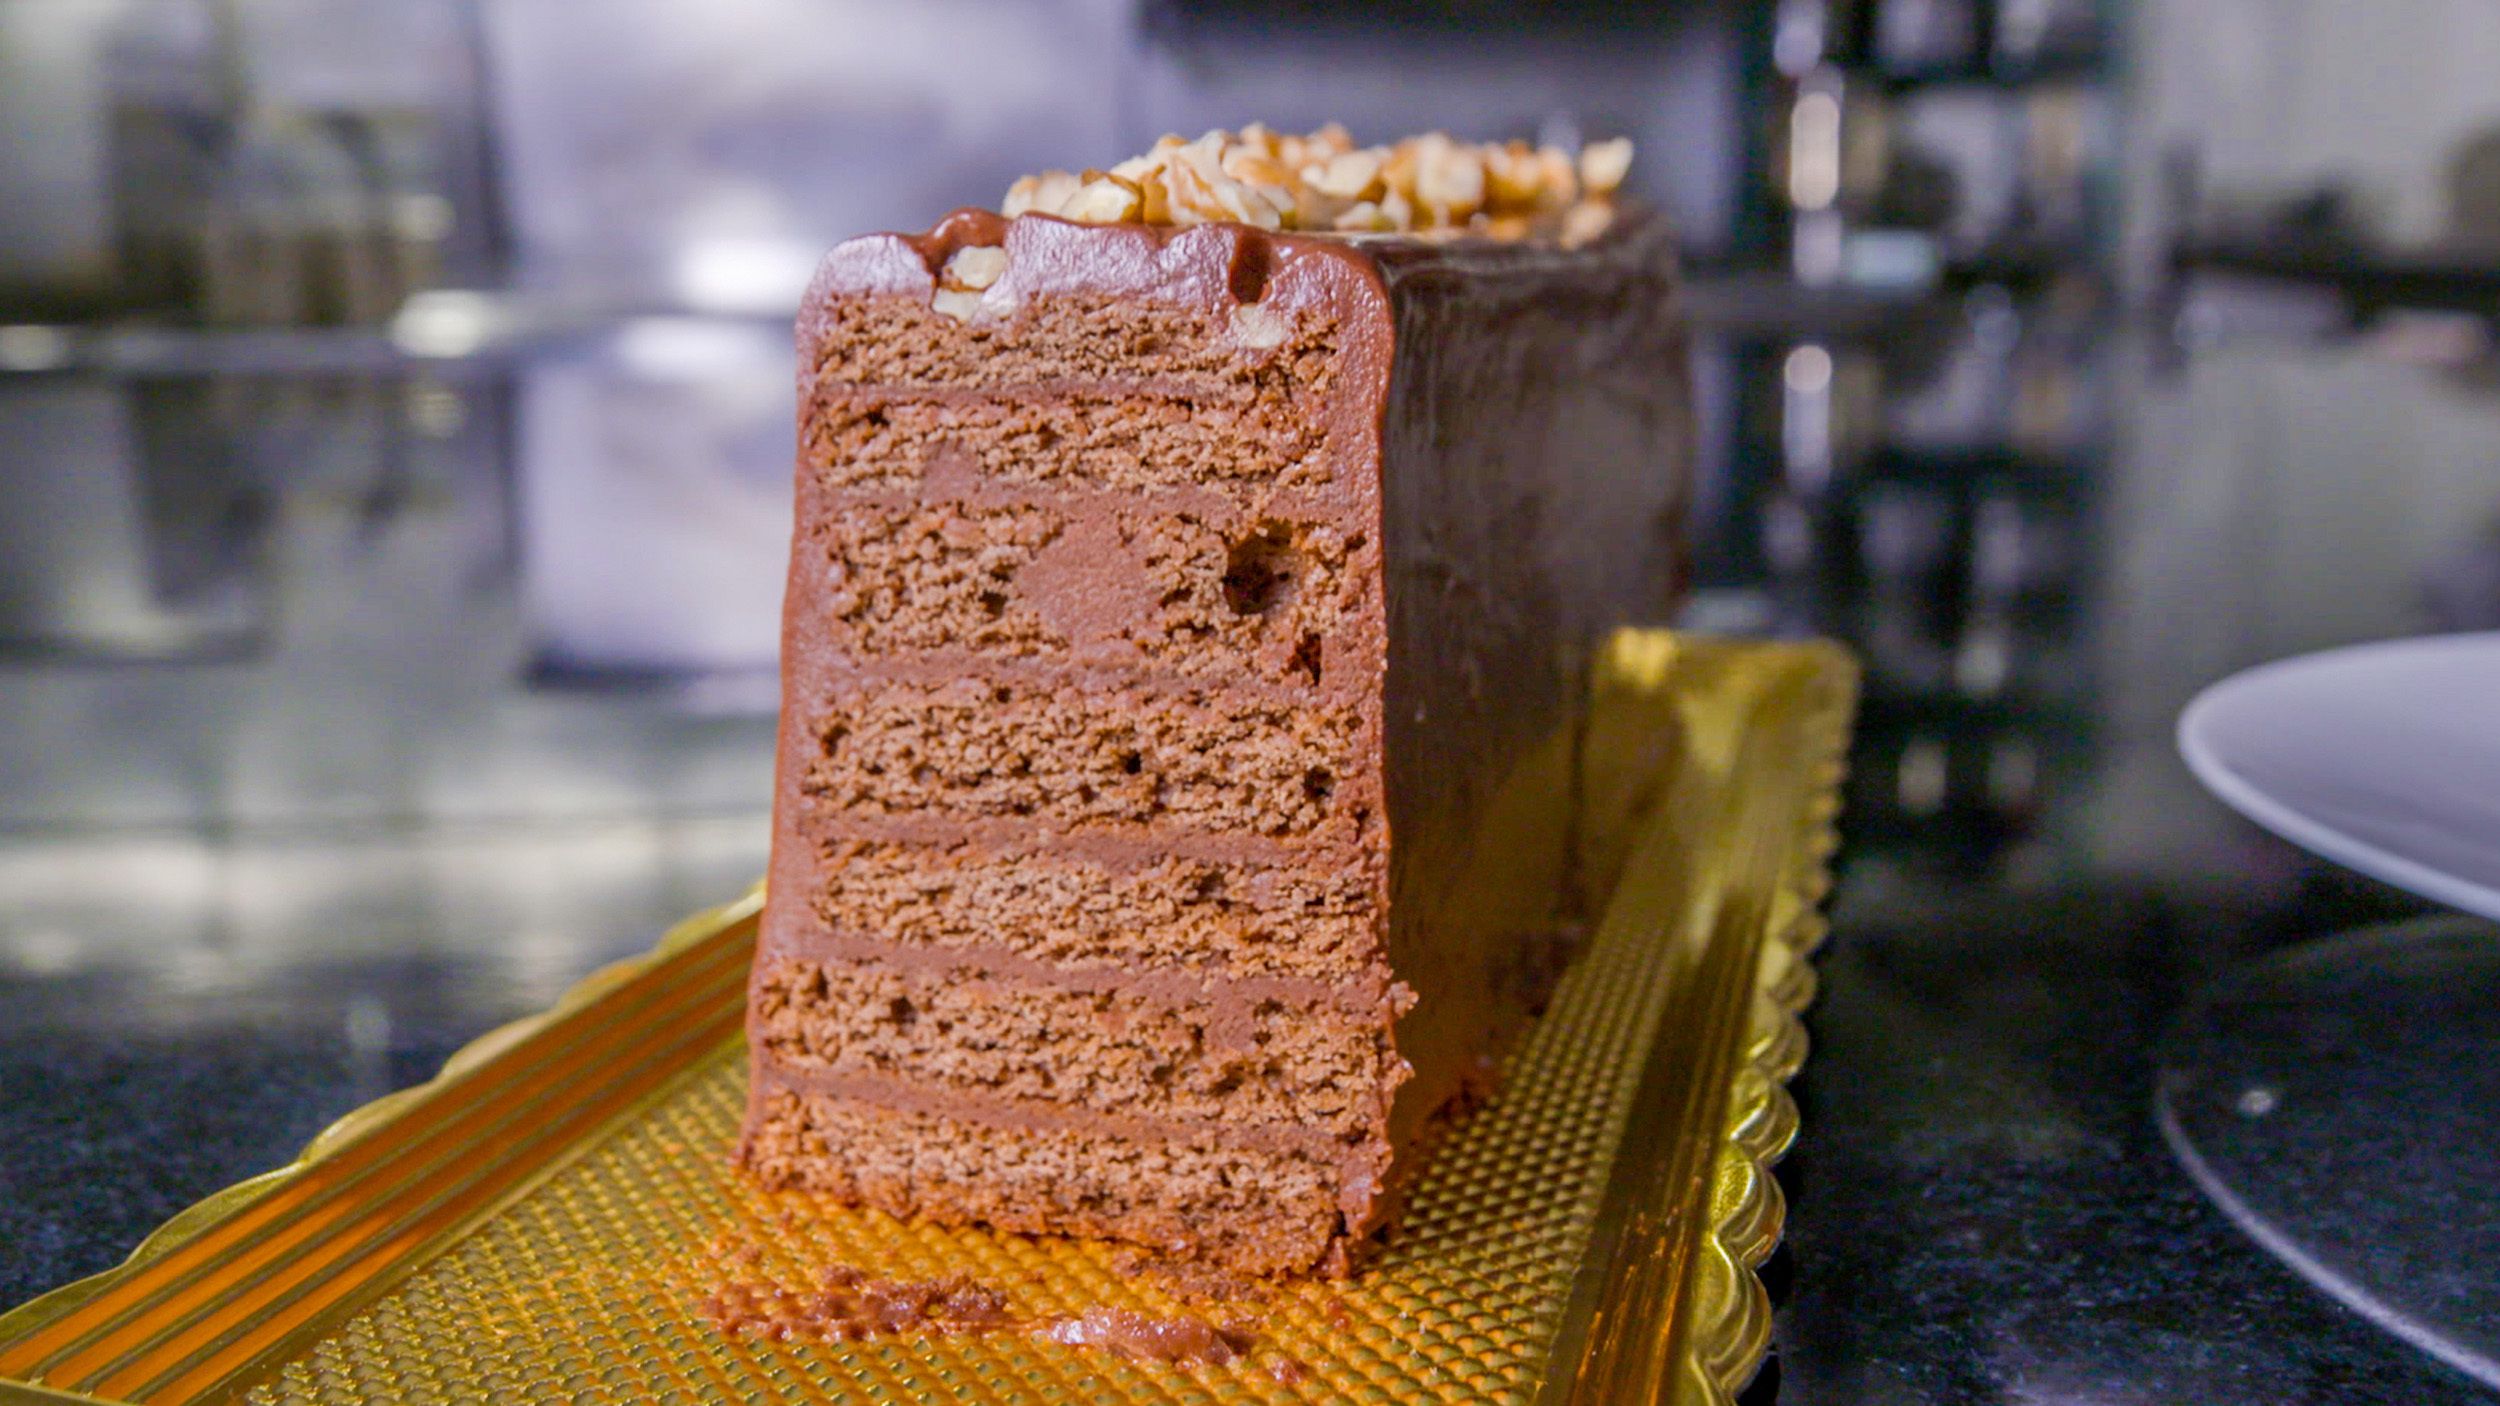 Gf flourless 12 layer chocolate cake - Photo from Ale & Compass Restaurant